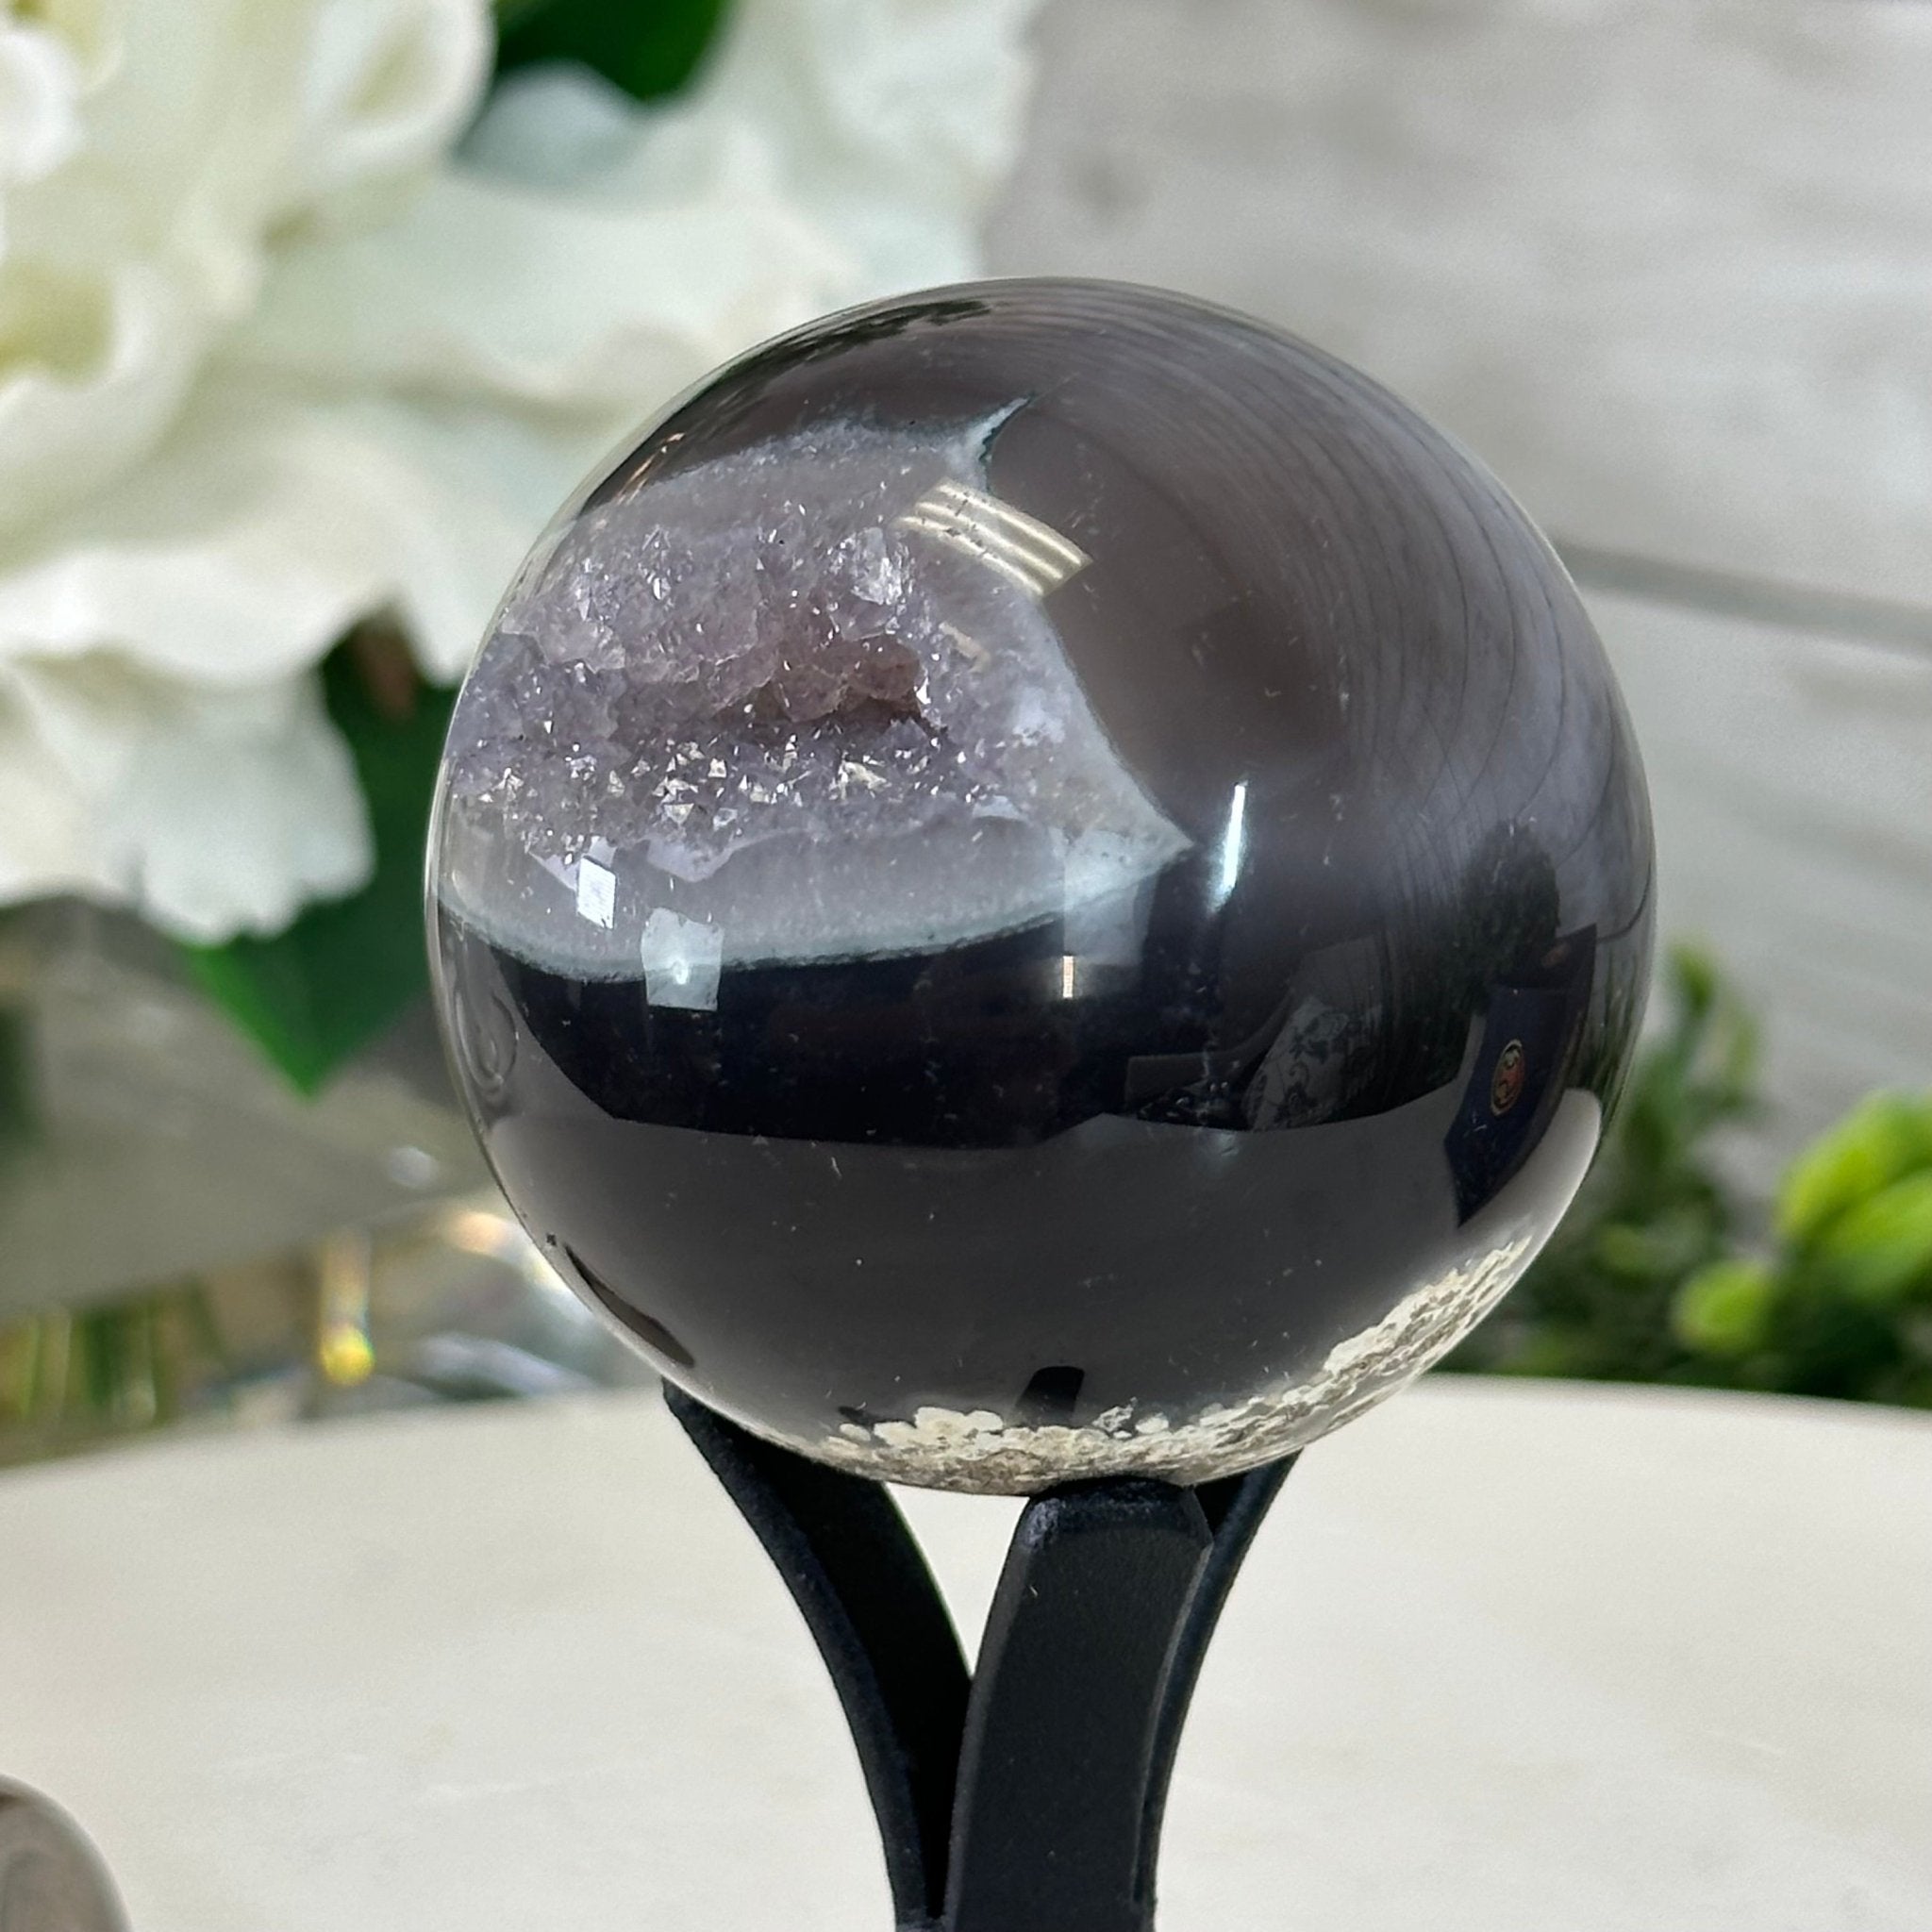 Druzy Agate Sphere on a Metal Stand, 0.6 lbs & 4.8" Tall #5634-0002 - Brazil GemsBrazil GemsDruzy Agate Sphere on a Metal Stand, 0.6 lbs & 4.8" Tall #5634-0002Spheres5634-0002